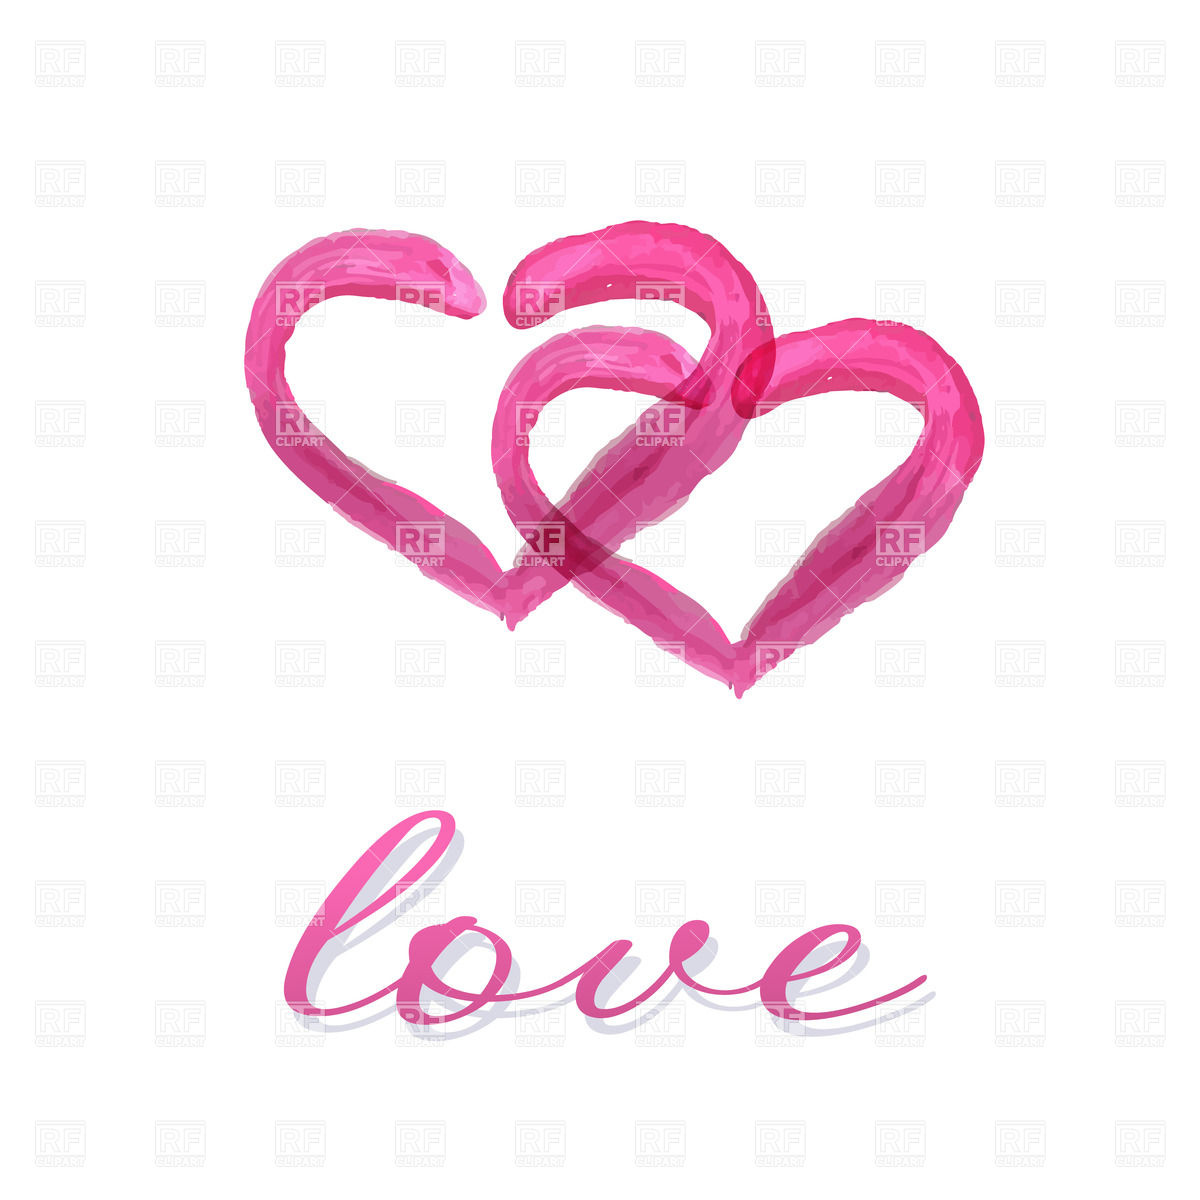 Hearts 27797 Icons And Emblems Download Royalty Free Vector Clip